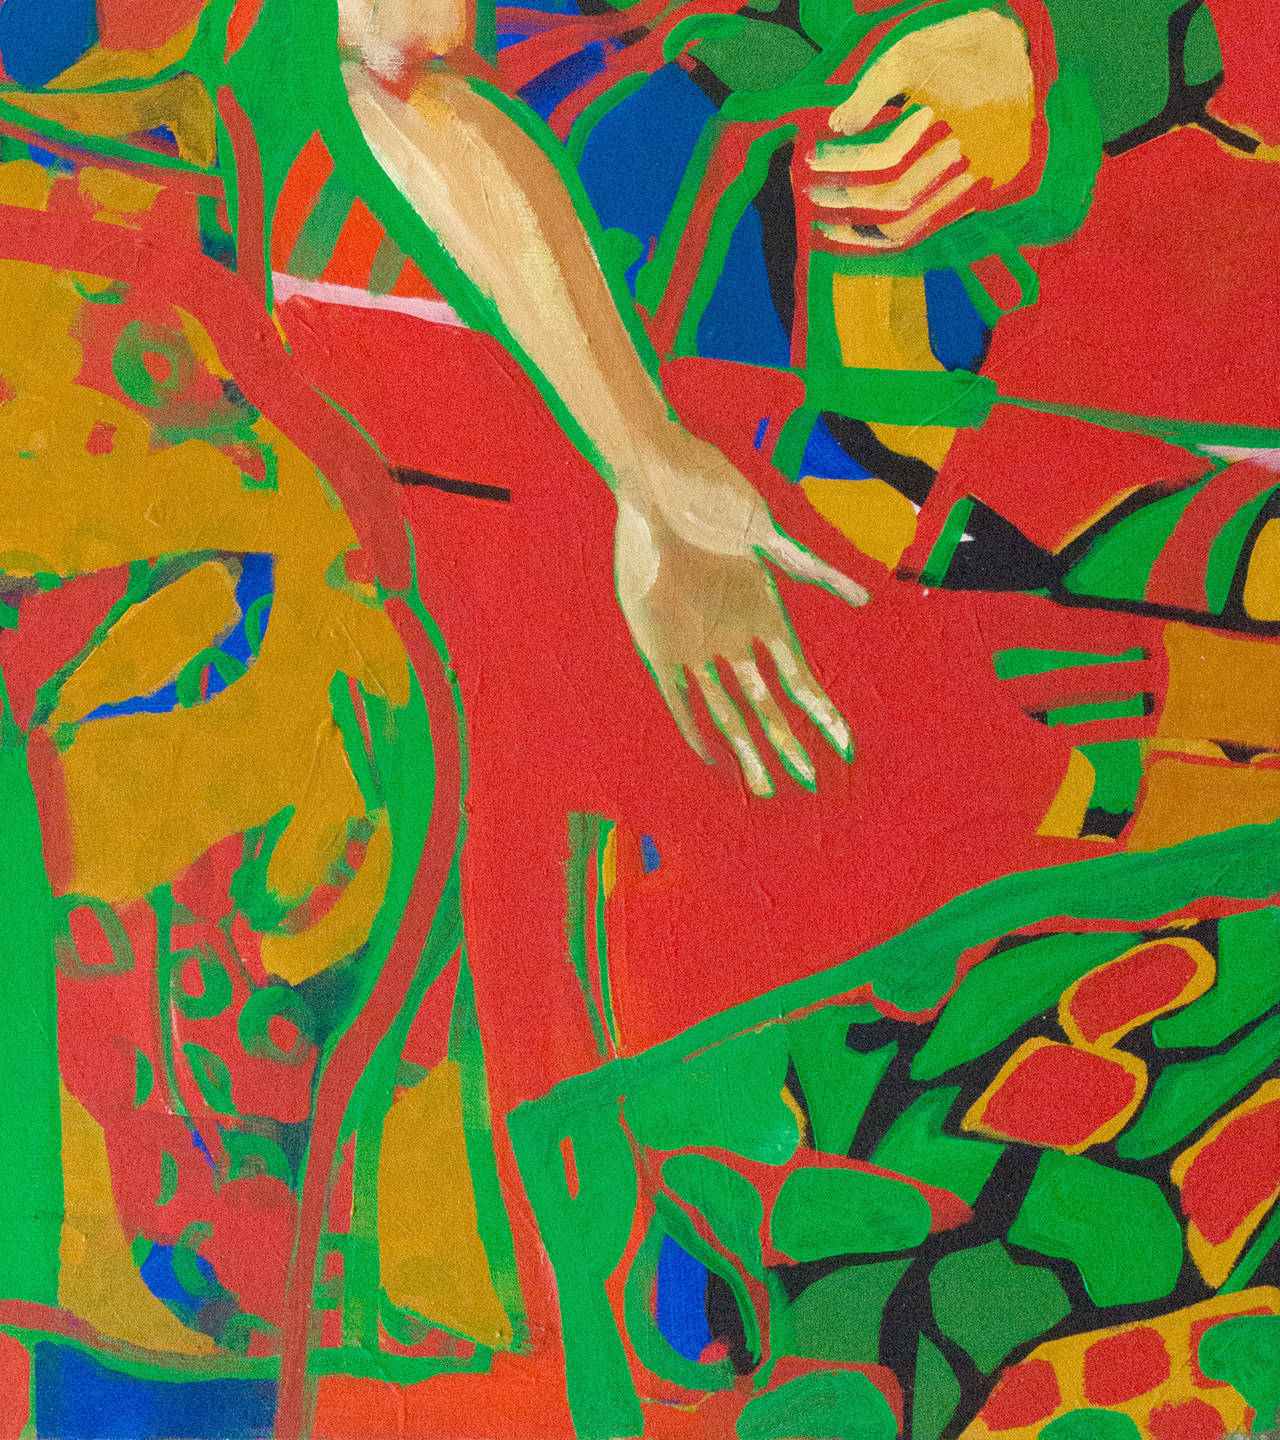 Large, Fauve Figural with a Woman Reading; San Francisco Bay Area Artist - Green Figurative Painting by Guido Augusts